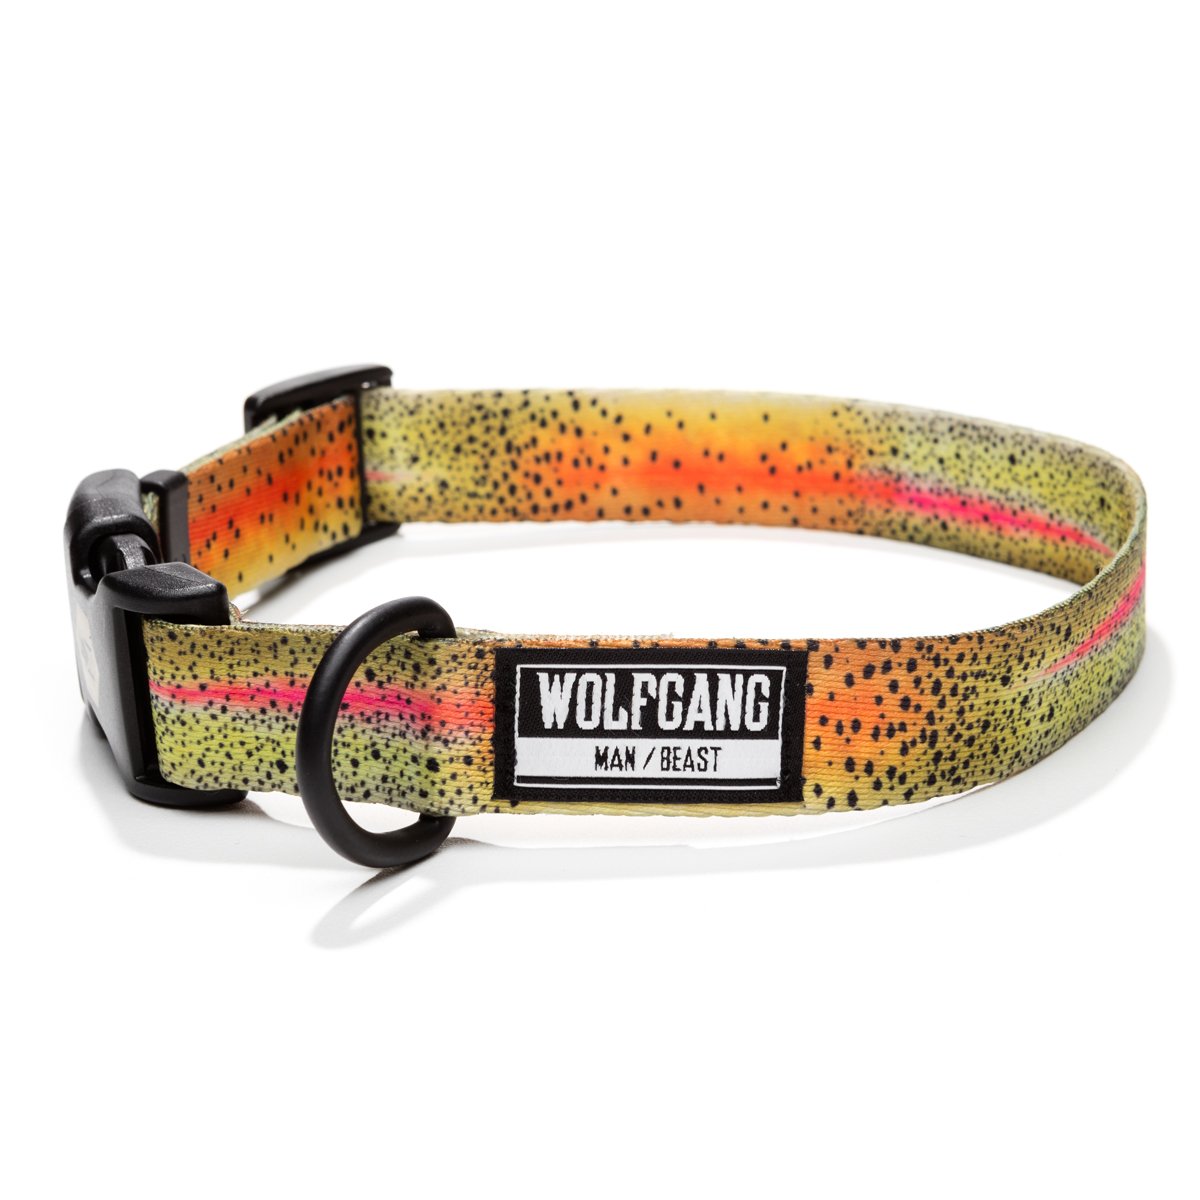 CutBow DOG COLLAR Made in the USA by Wolfgang Man & Beast